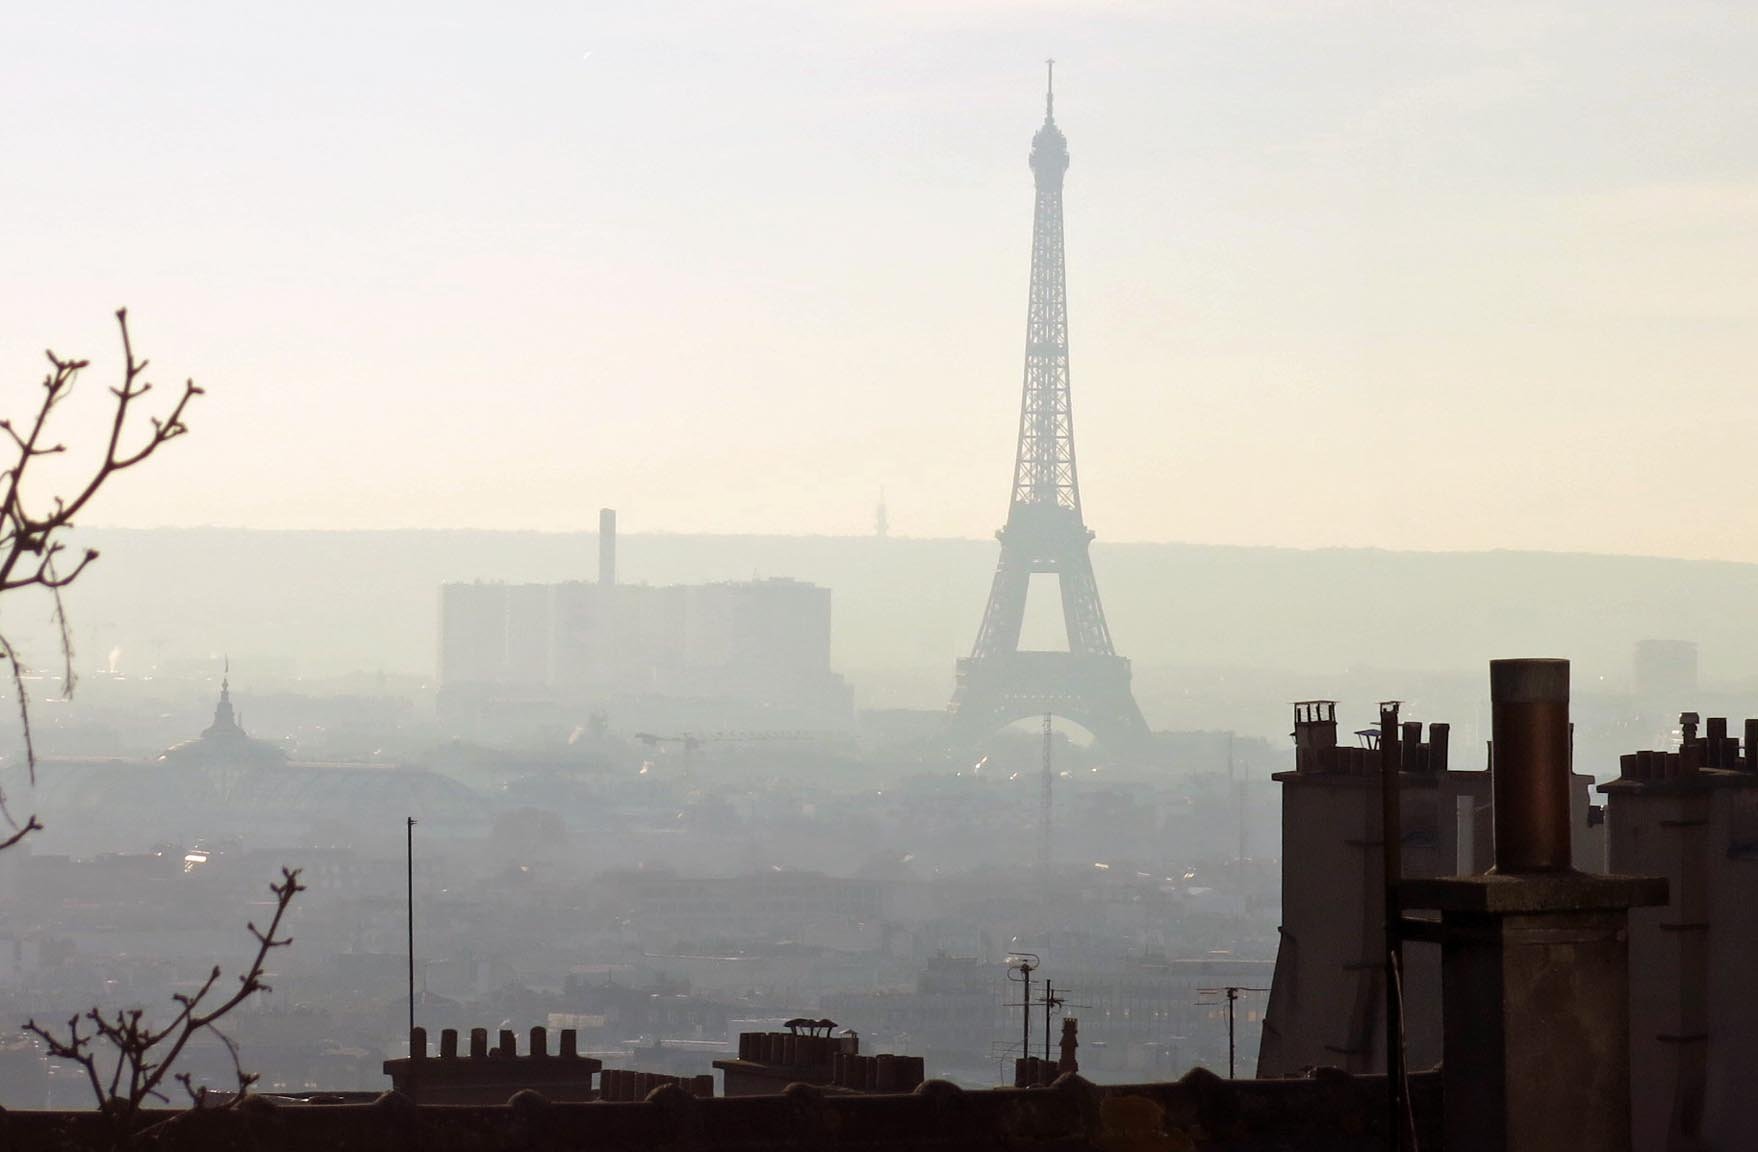 Prototype air filtering stations placed in Paris, France, helped to keep the level of particulates below World Health Organization thresholds. Image credit - Pollution event in Paris by Tangopaso and Mariordo is licensed under CC0 1.0